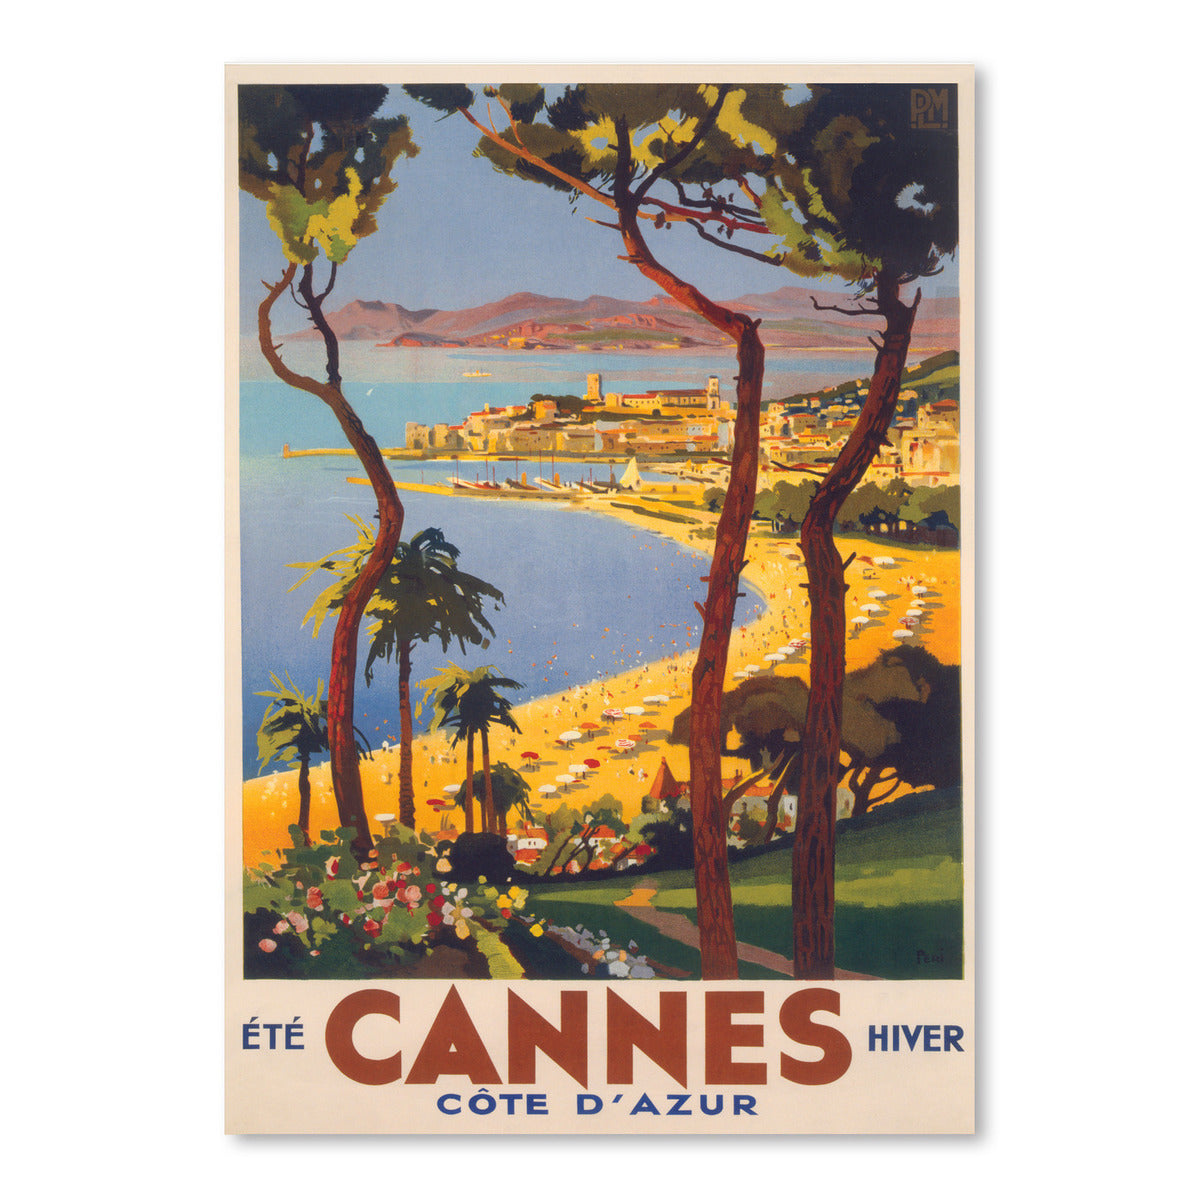 Travel Poster For Cannes by Found Image Press Art Print - Art Print - Americanflat